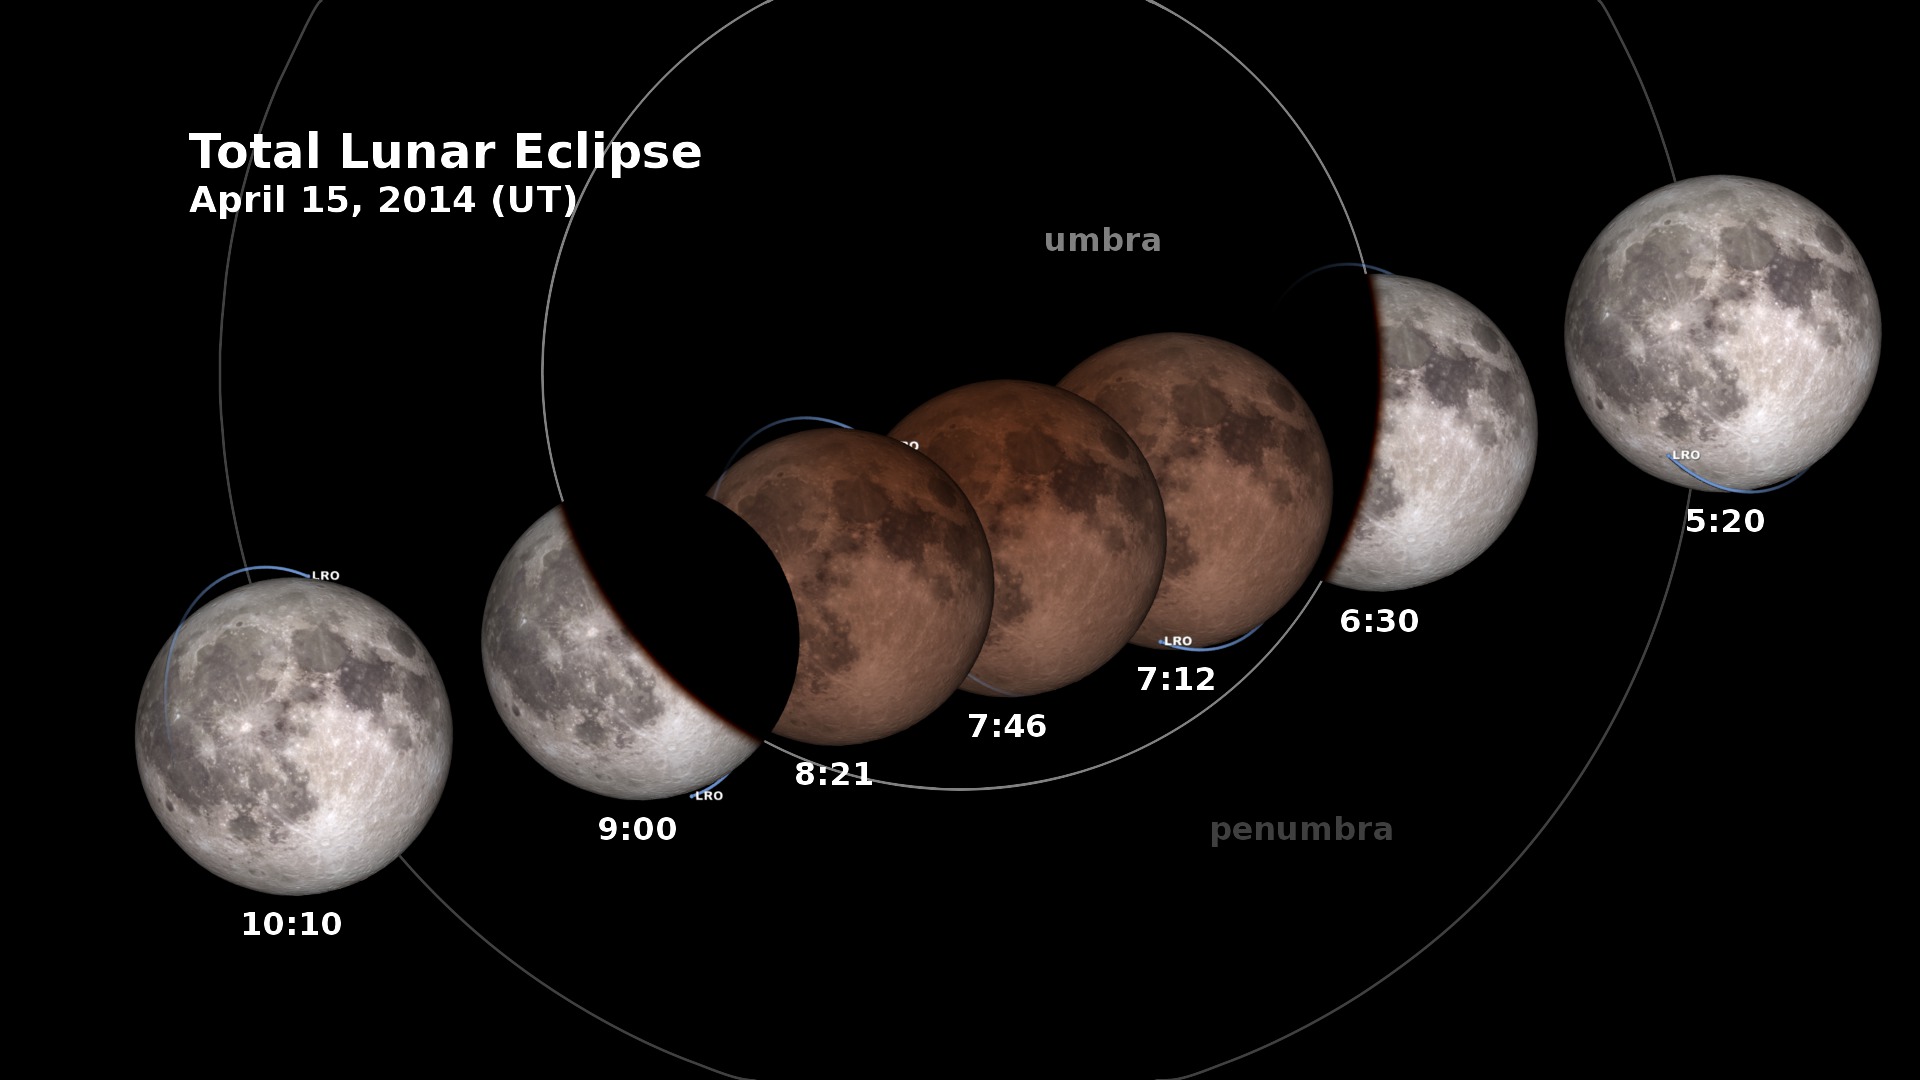 Universal Time (UT). The Moon moves right to left, passing through the penumbra and umbra, leaving in its wake an eclipse diagram with the times at various stages of the eclipse. Includes LRO's orbital motion.